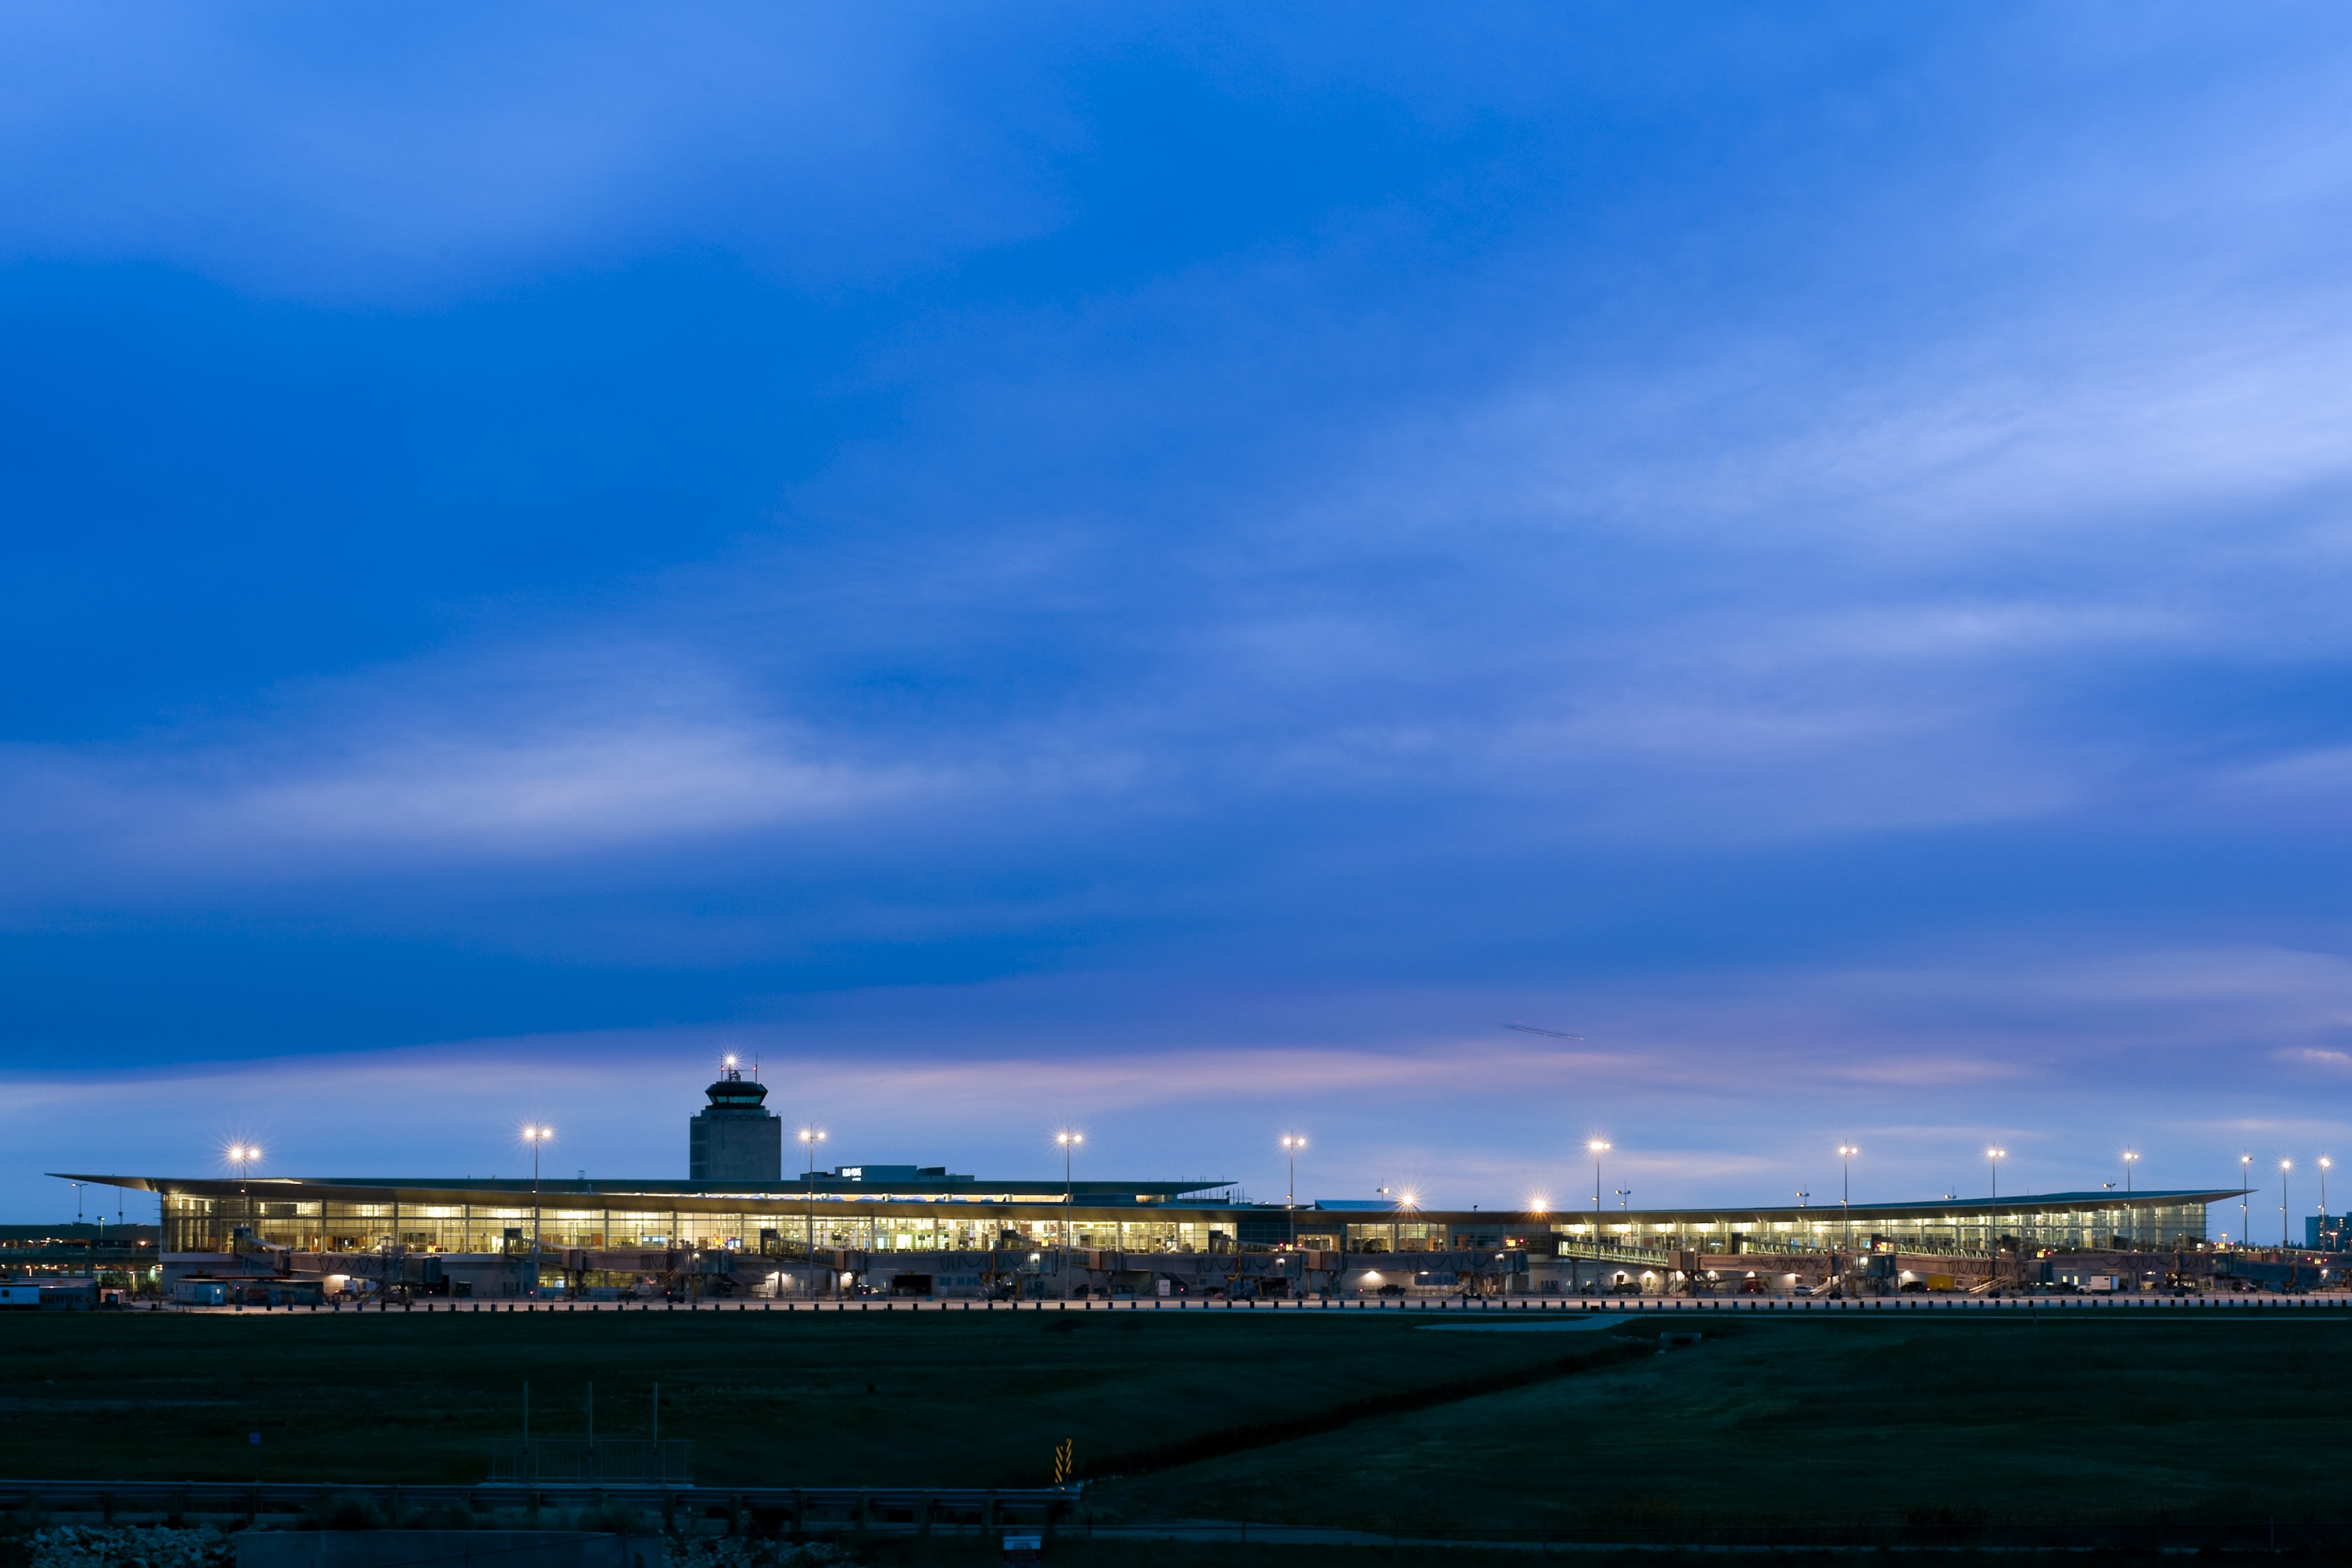 The terminal building from a distance depicting the vast prairie landscape and horizon.